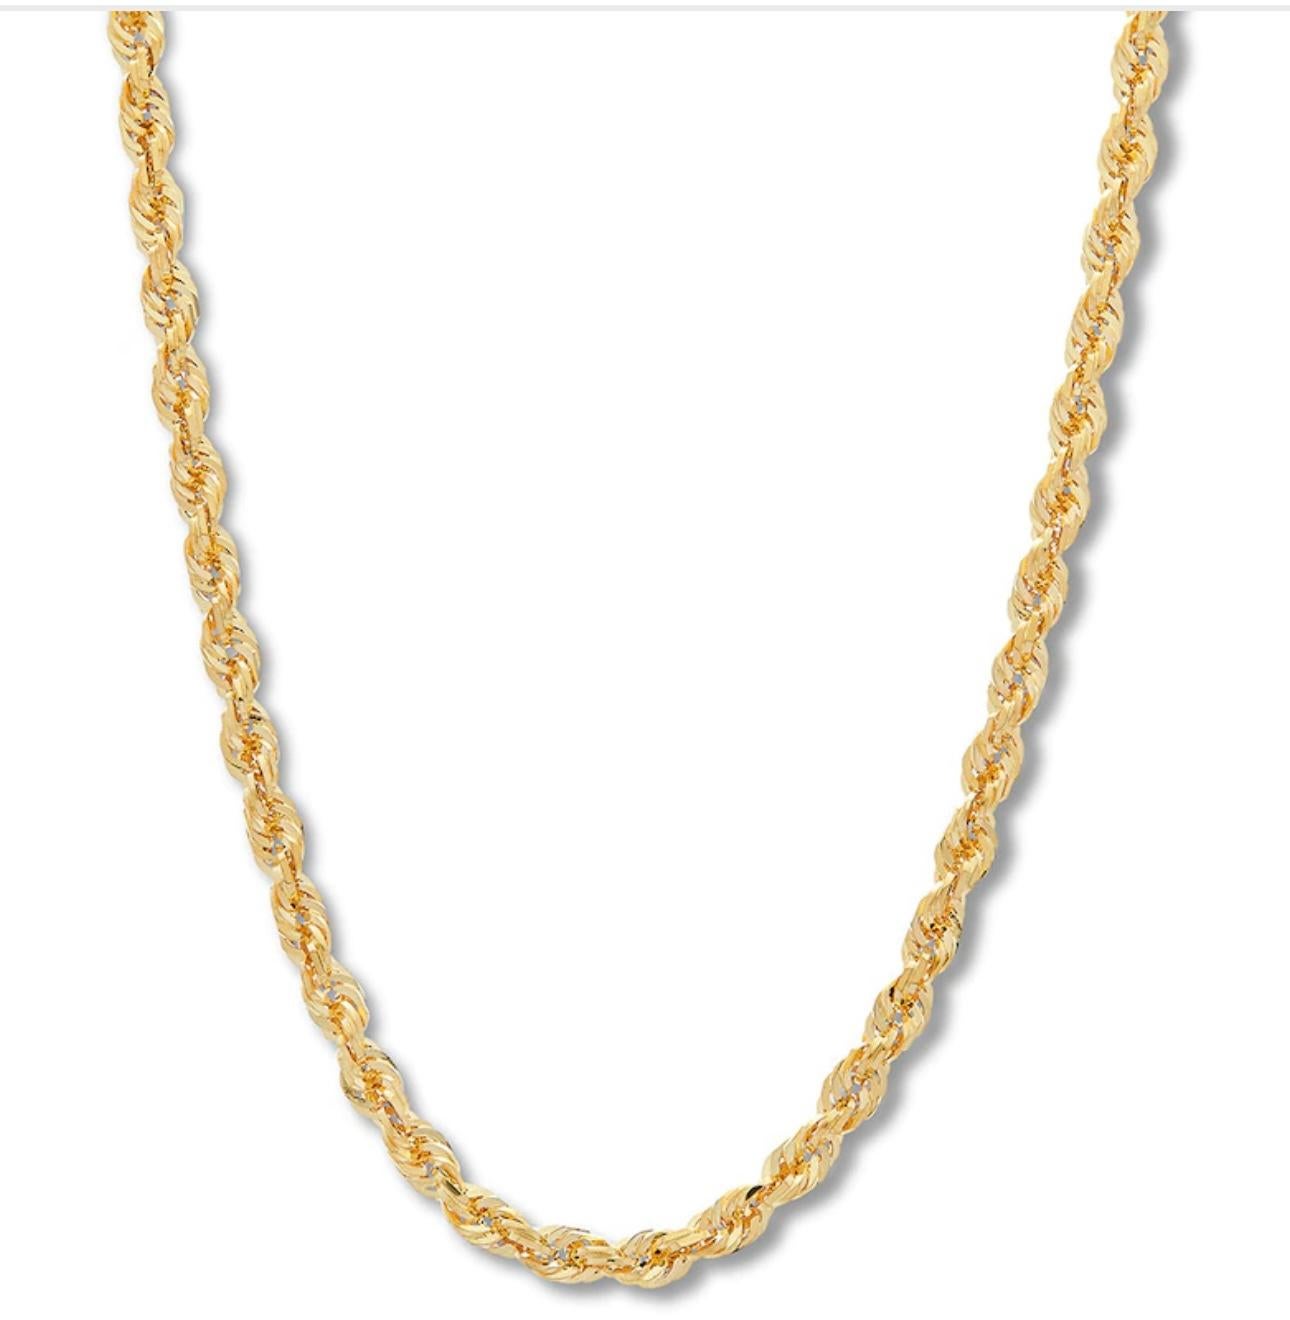 Vintage 14 Karat Yellow Gold 17 Gm, Rope Chain Necklace, 24 Inch long In Excellent Condition For Sale In New York, NY